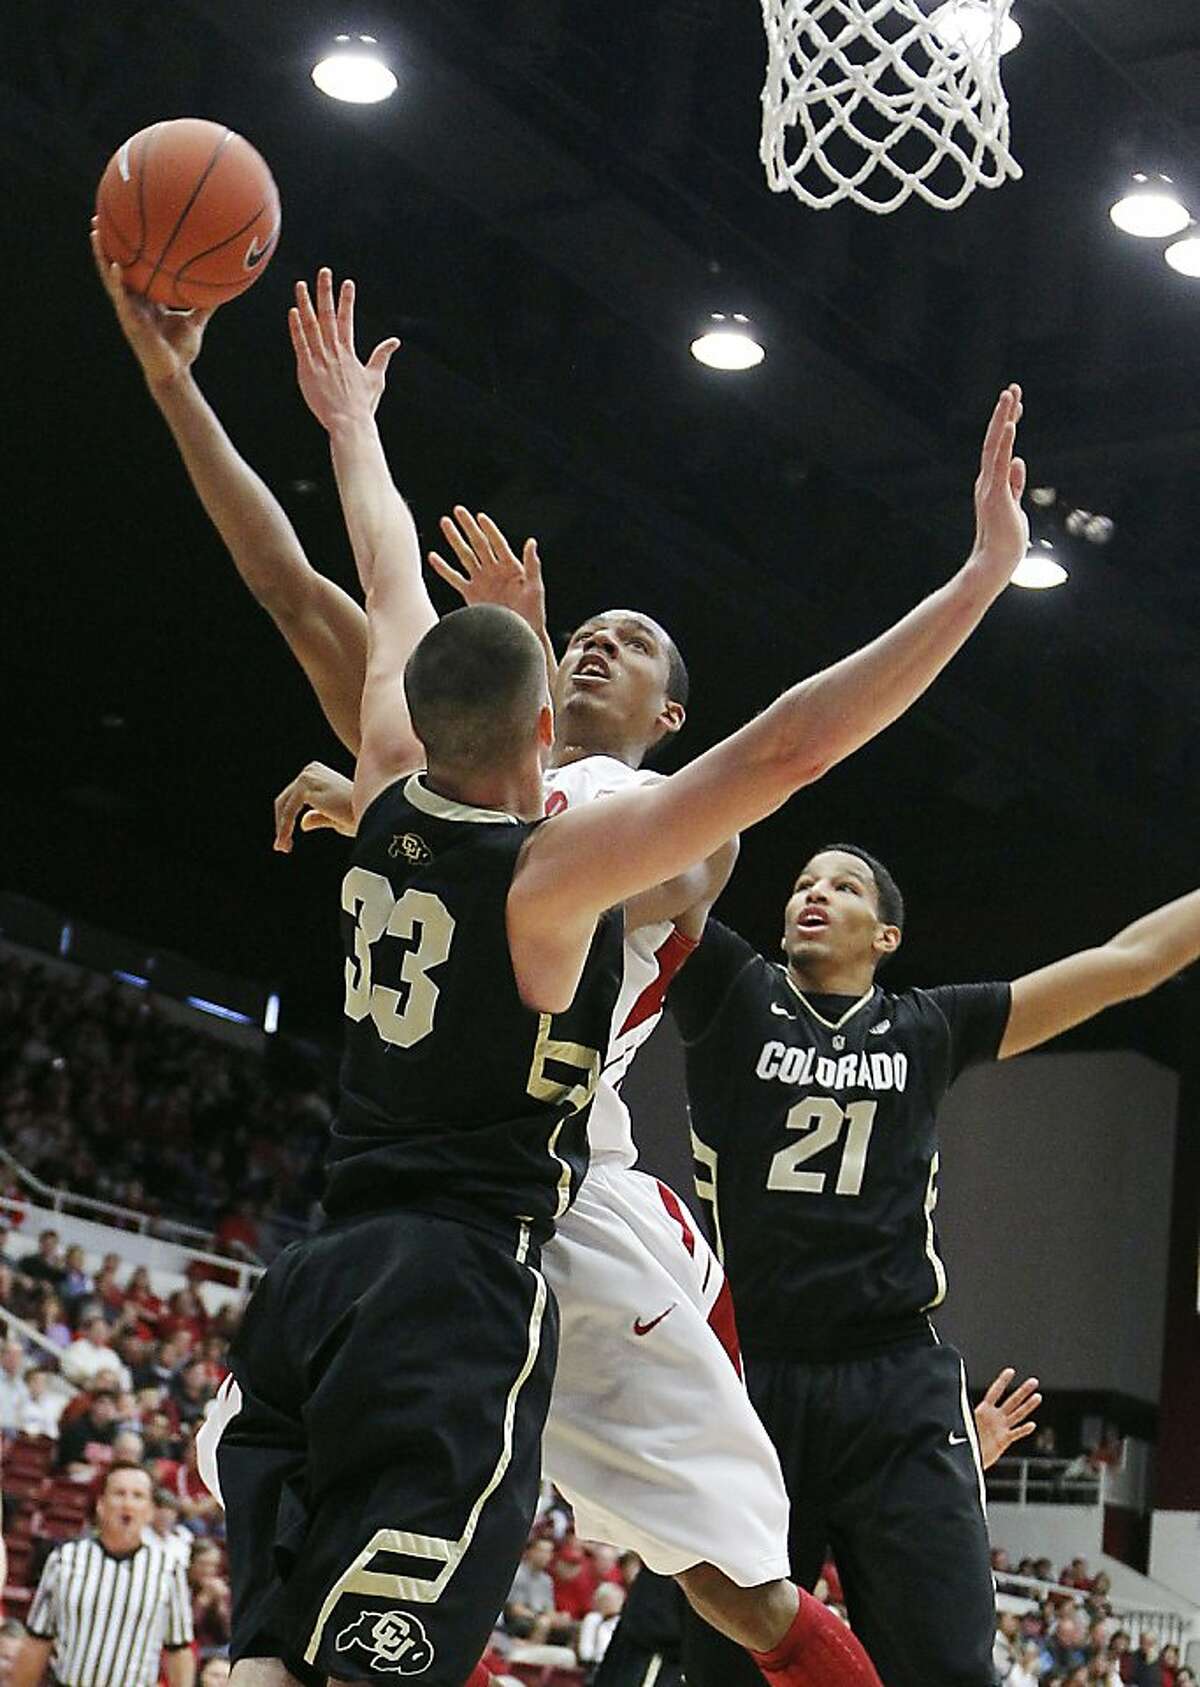 Stanford's Josh Owens, center, shoots over Colorado's Austin Dufault (33) as Andre Roberson (21) looks on in the first half of an NCAA college basketball game on Saturday, Jan. 14, 2012, in Stanford, Calif. (AP Photo/Tony Avelar)